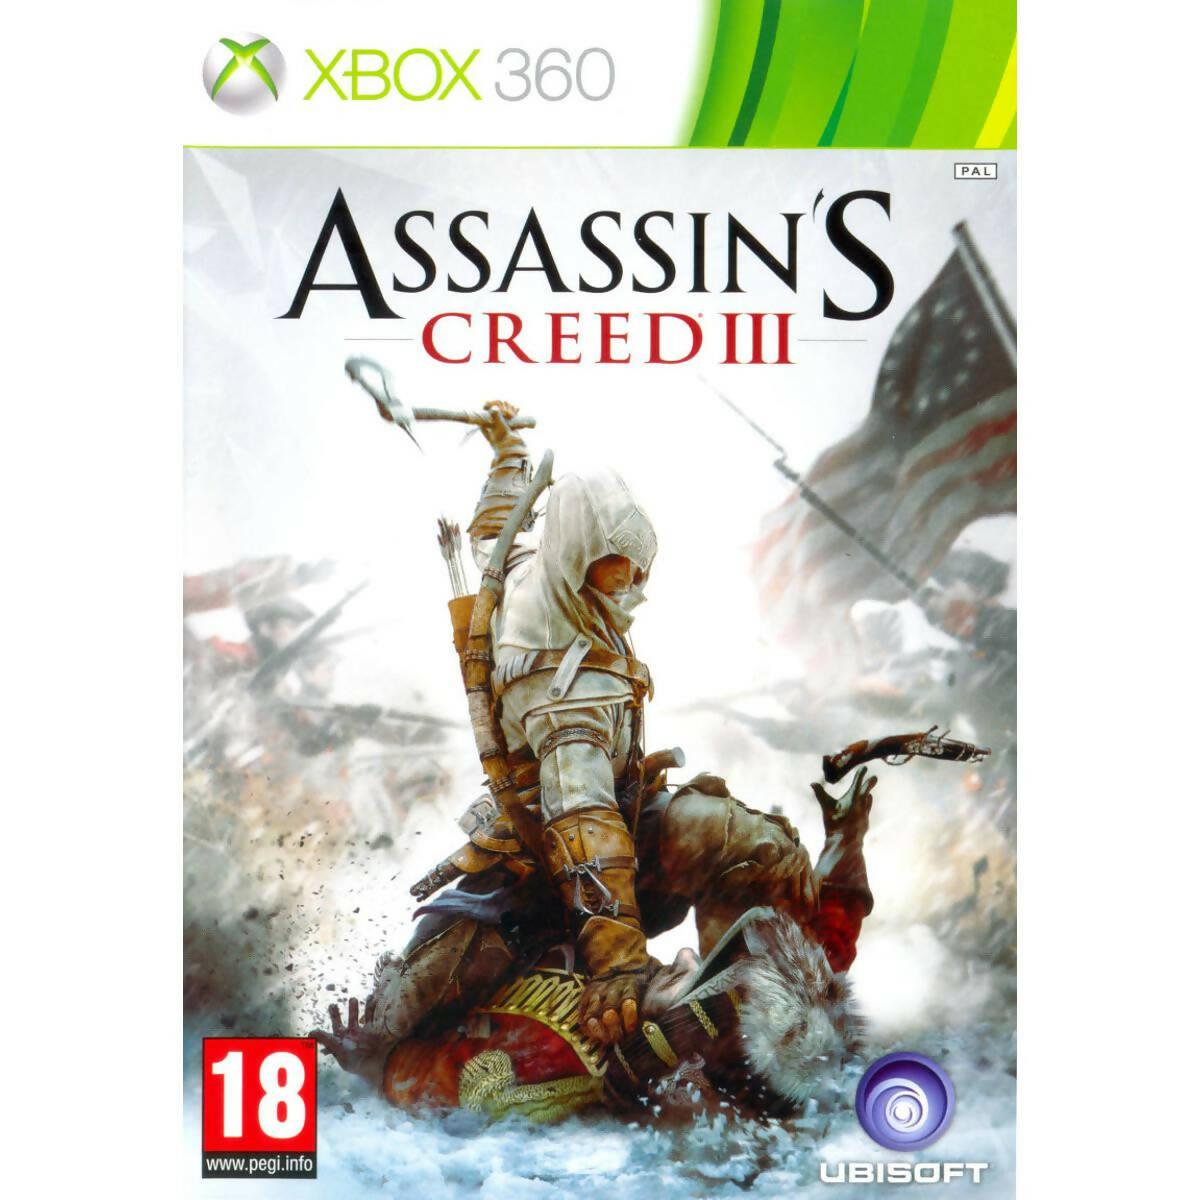 Assassins Creeds 3 - Xbox 360 video game - JTAG Modified System - 2 Disc Game - ValueBox